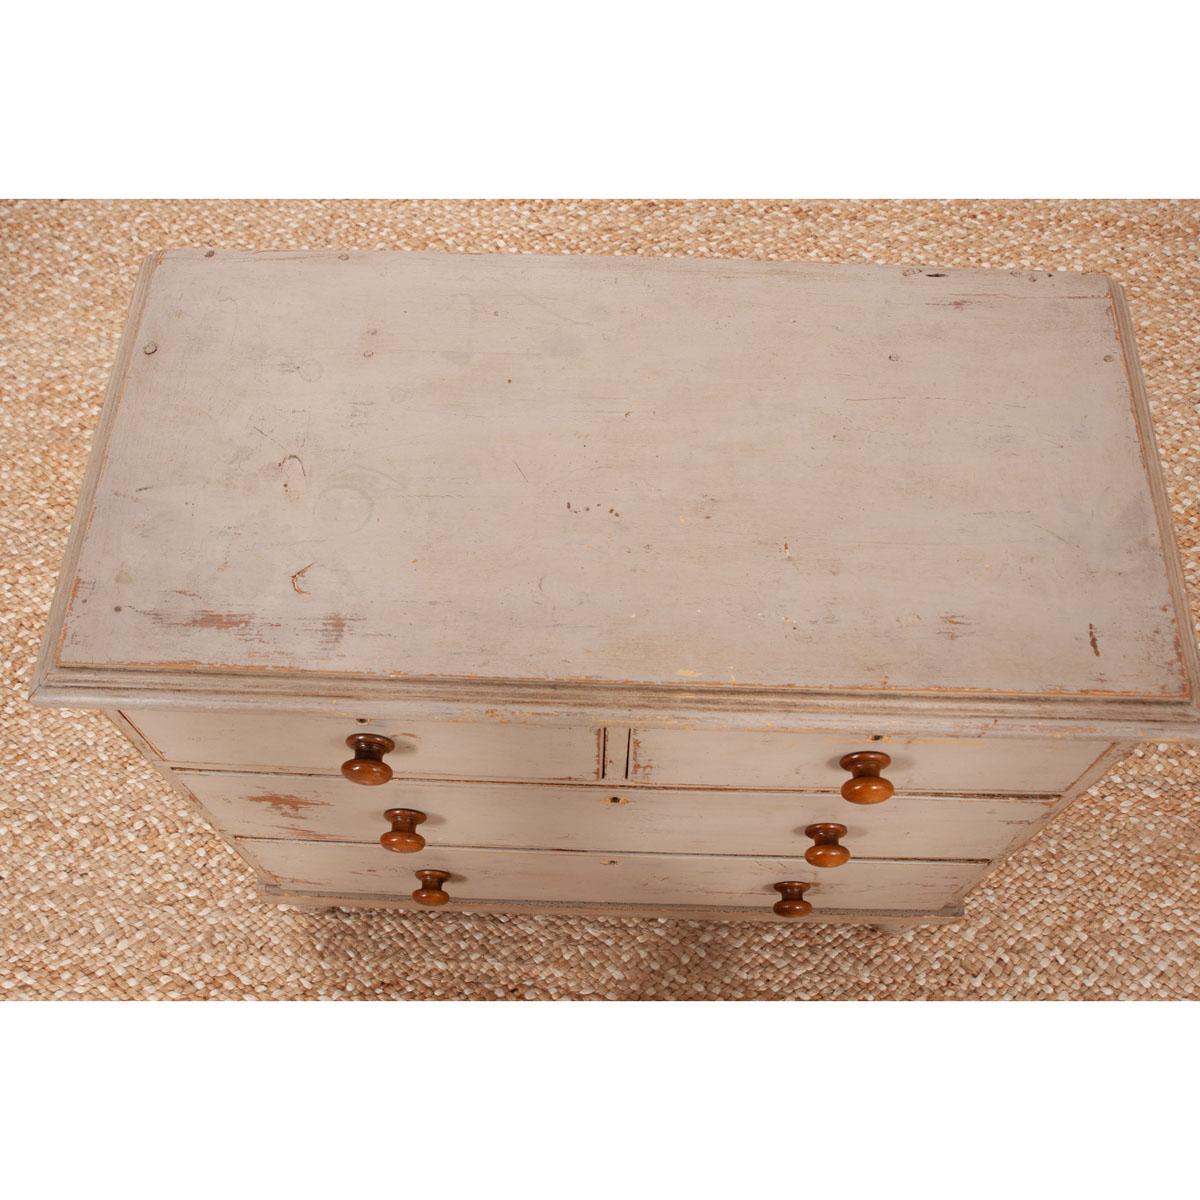 A small painted, four drawer chest from 19th century England. Layers of paint add depth and character to this piece. A gray-ish/green color is the top layer with yellow, white and bare wood showing through. The four drawers each have natural stained